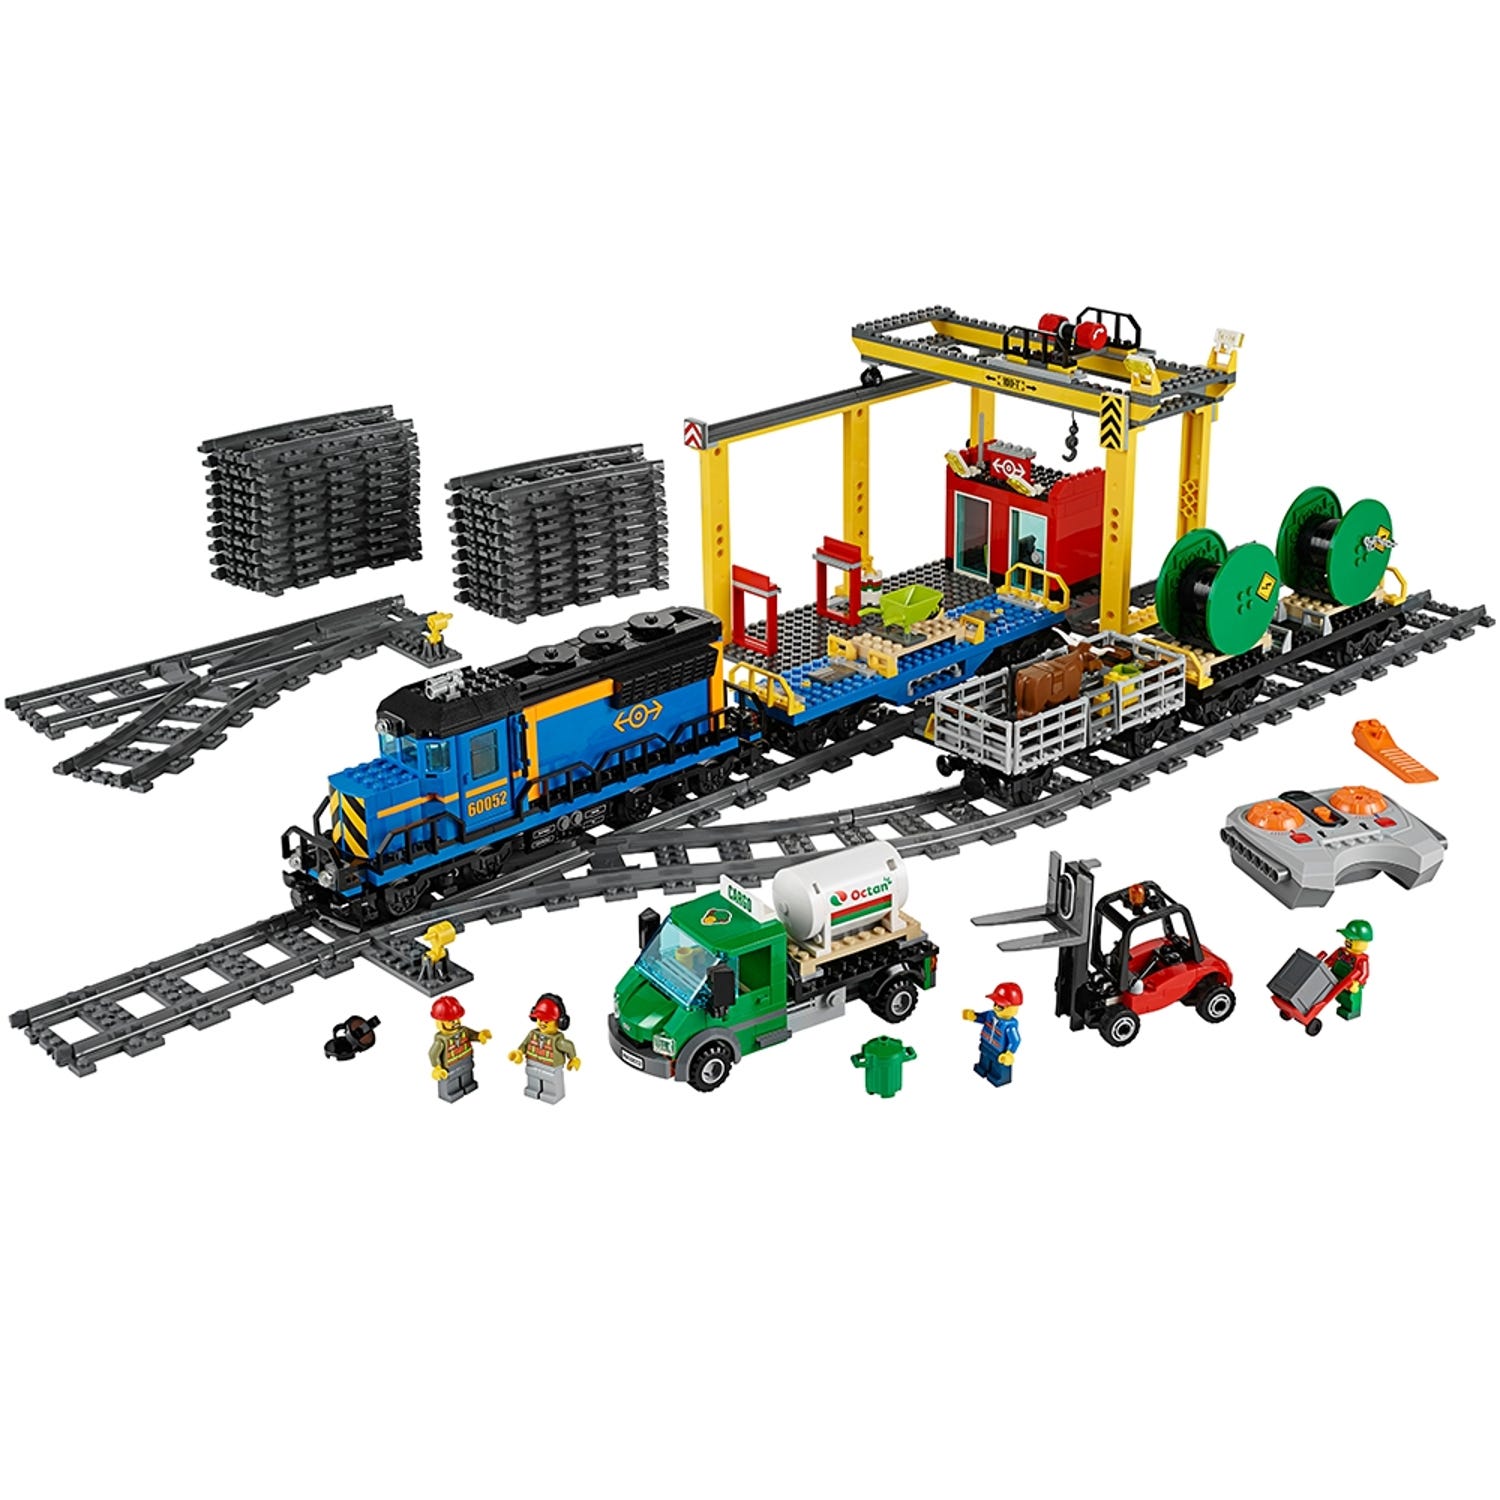 Cargo Train | City | Buy online at Official LEGO® Shop US